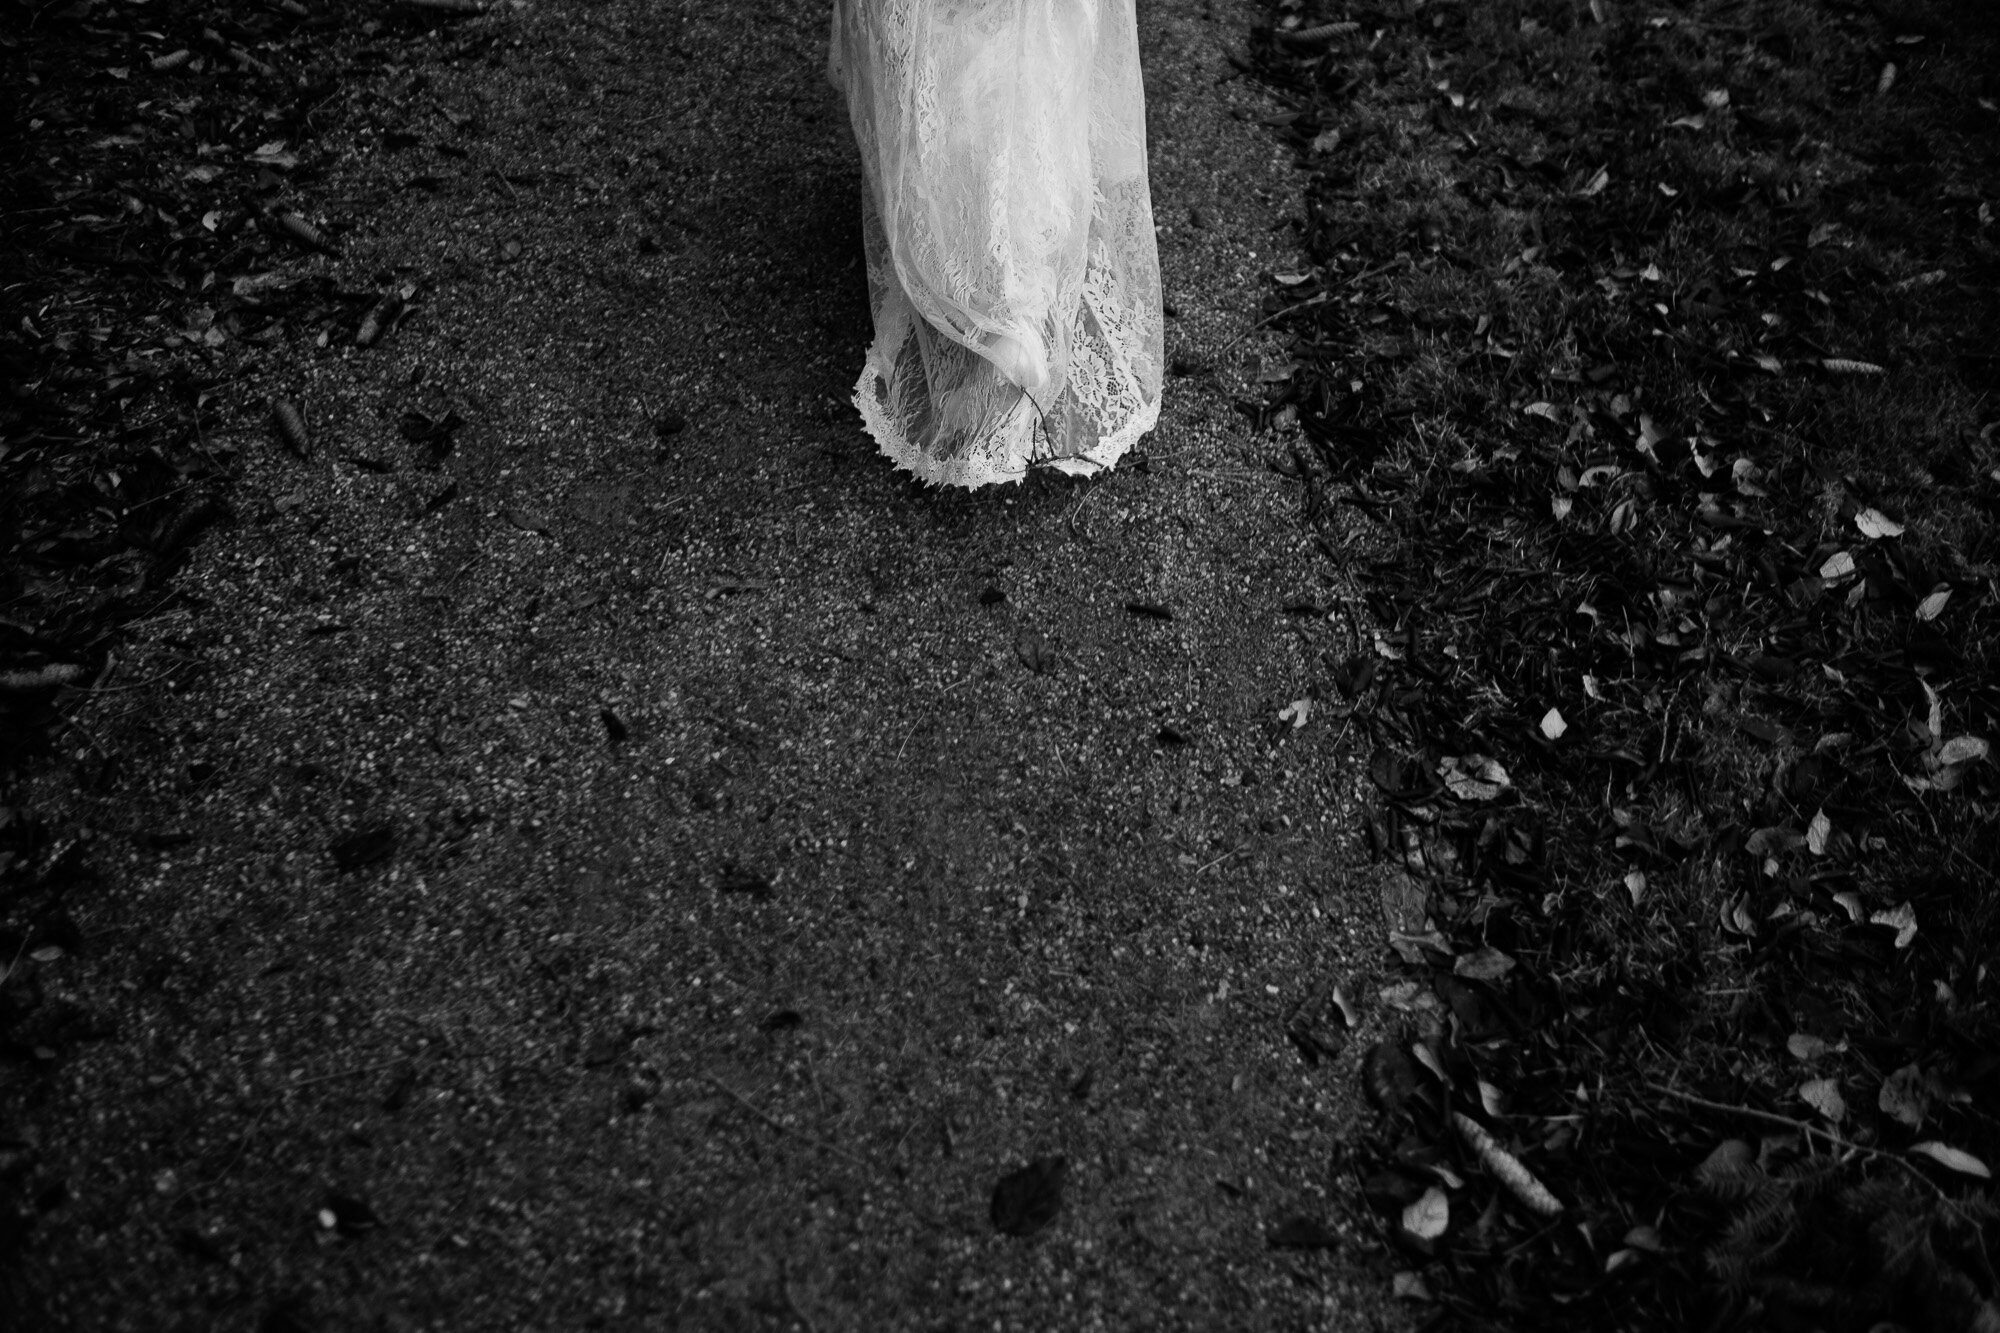  A photograph of the brides dress as she walks across the grounds of Langdon Hall in Cambridge, Ontario during their small intimate winter wedding. Wedding photograph by Toronto wedding photographer Scott Williams. 